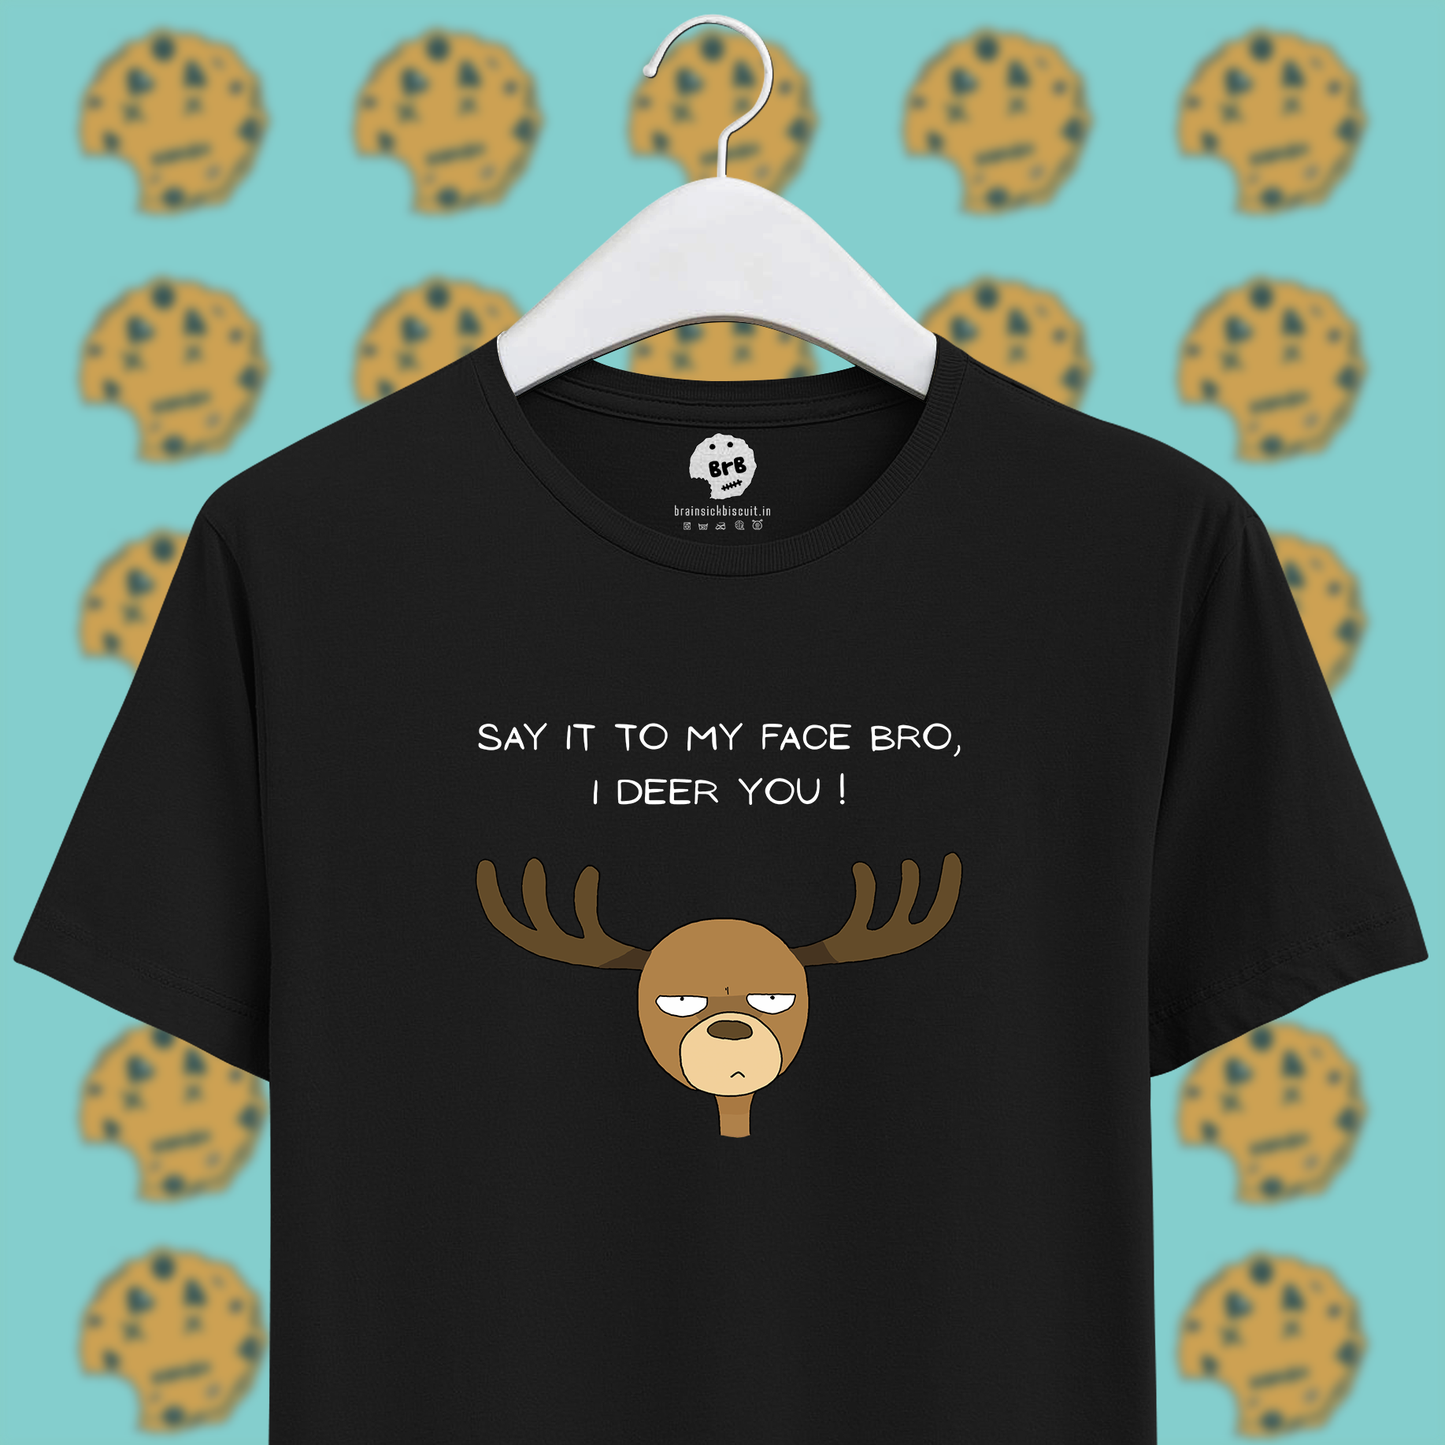 deer pun with say it to my face bro, i deer you text on unisex black half sleeves t-shirt.